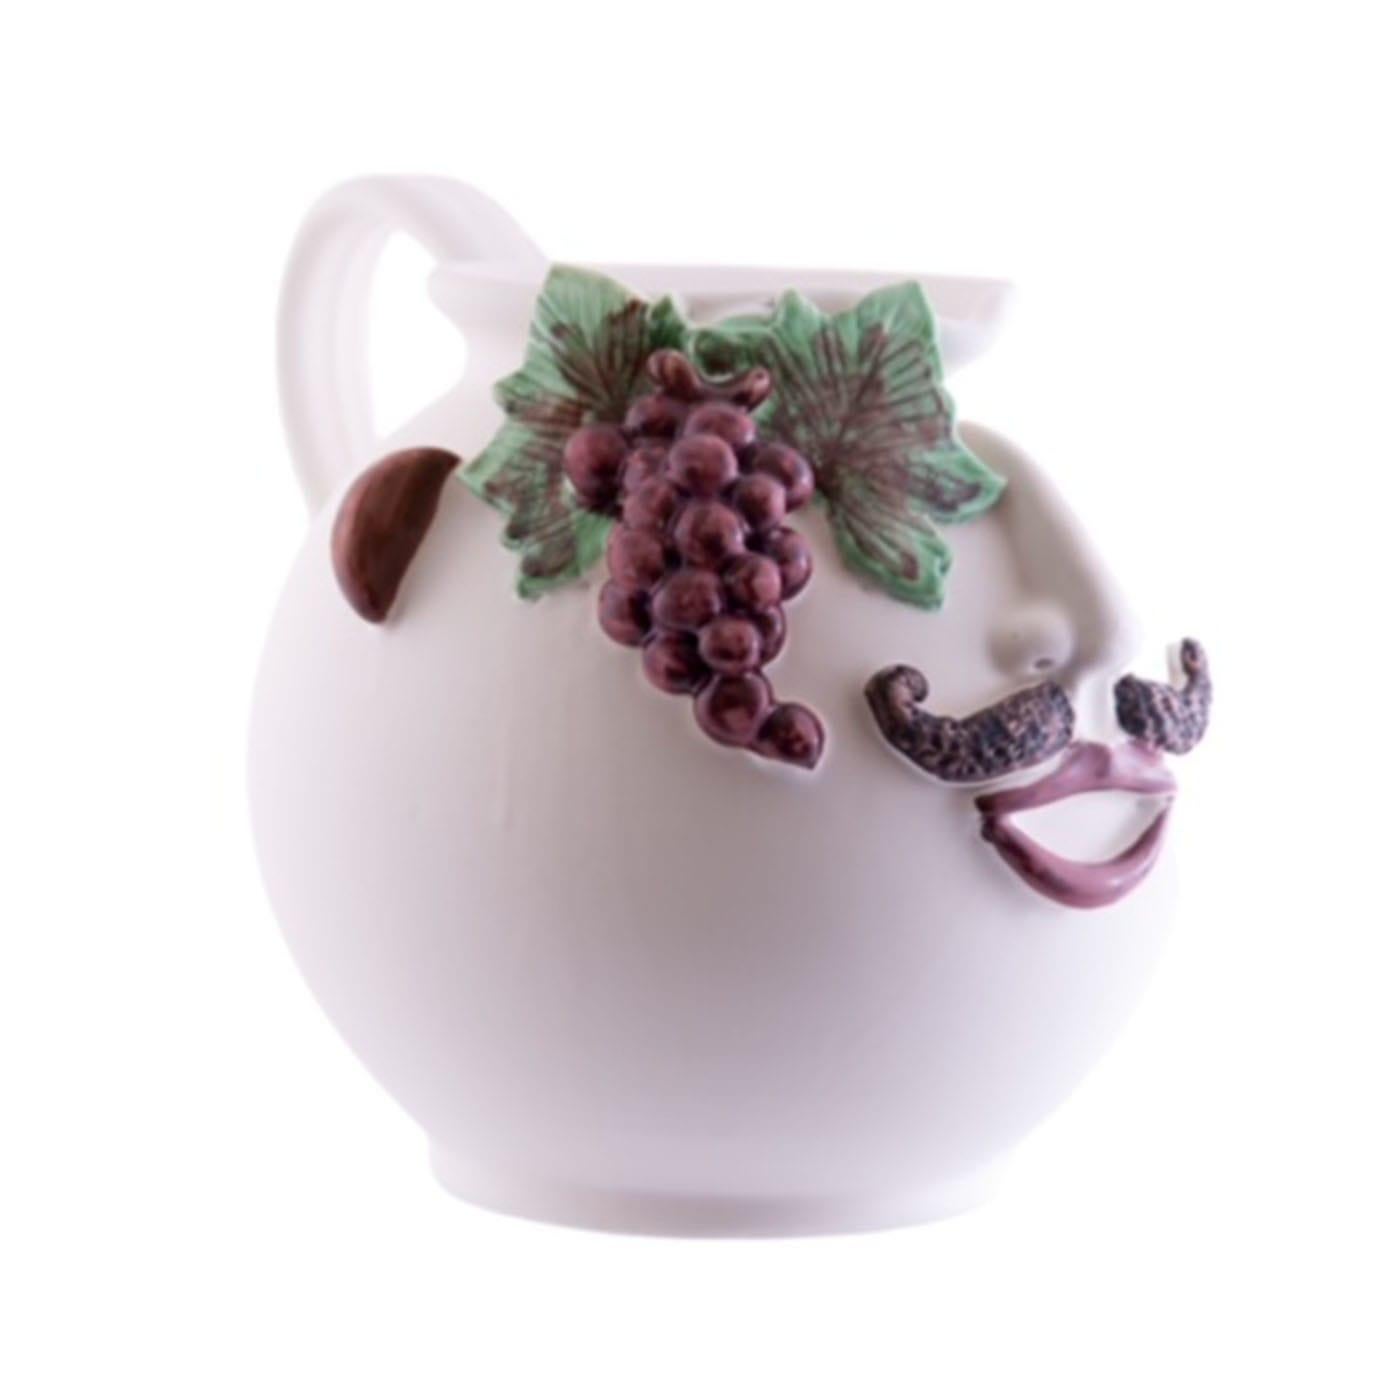 The large Nerello pitcher, embodying the essence of a black grape merchant, is a stunning piece crafted from white clay and adorned with a smooth, matte cream glaze complemented by vibrant second fire colors. Versatile in its use, this figurative